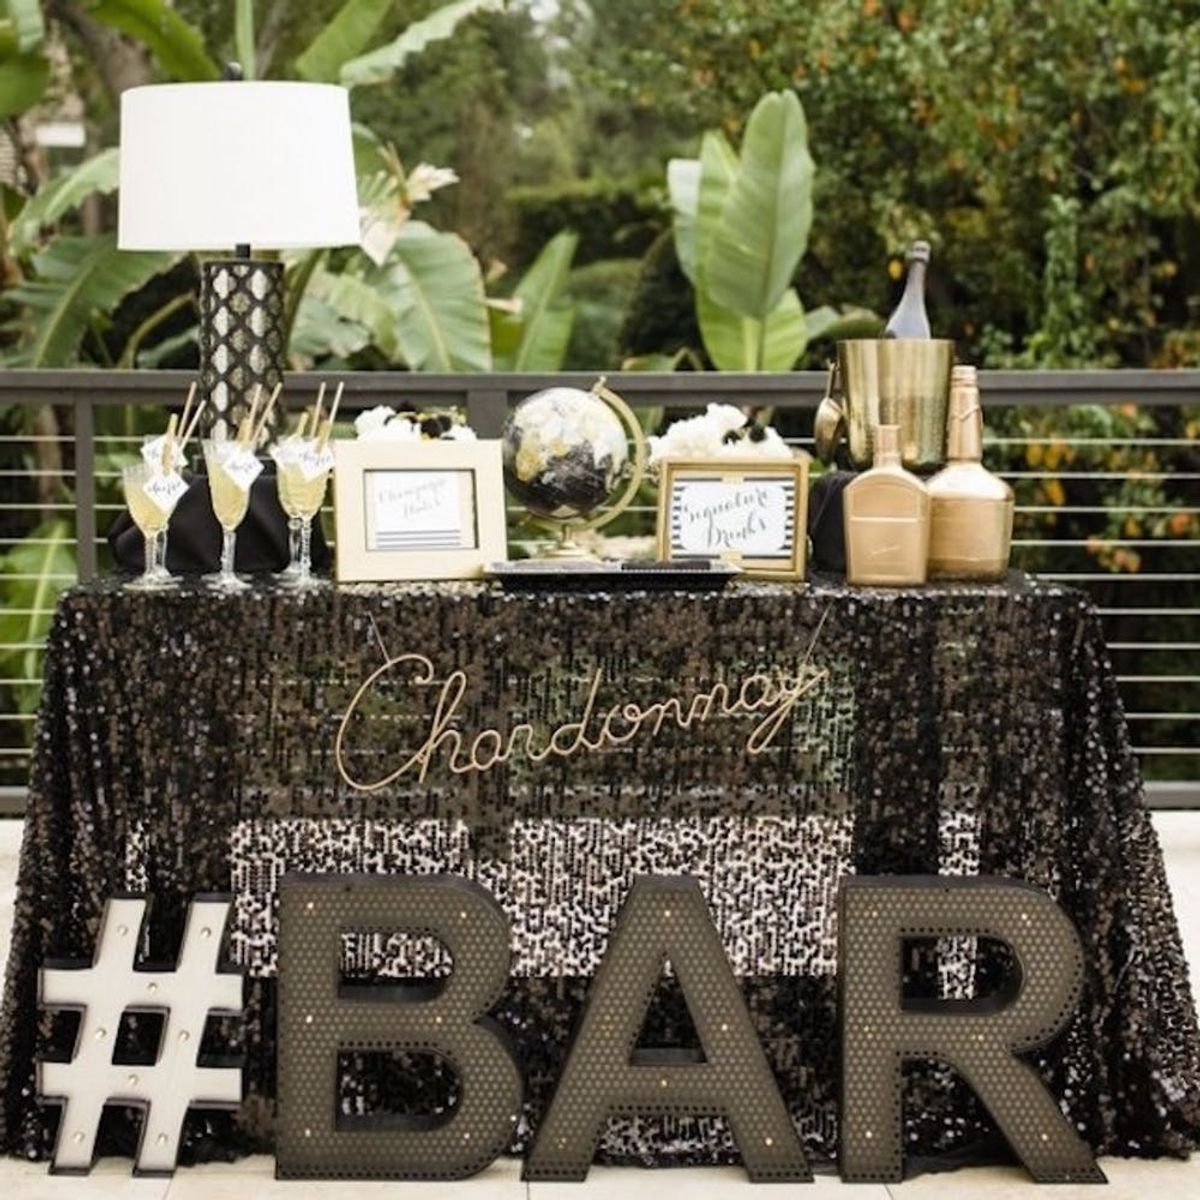 10 Sweet Wedding Cocktail Stations That Your Guests Will Love